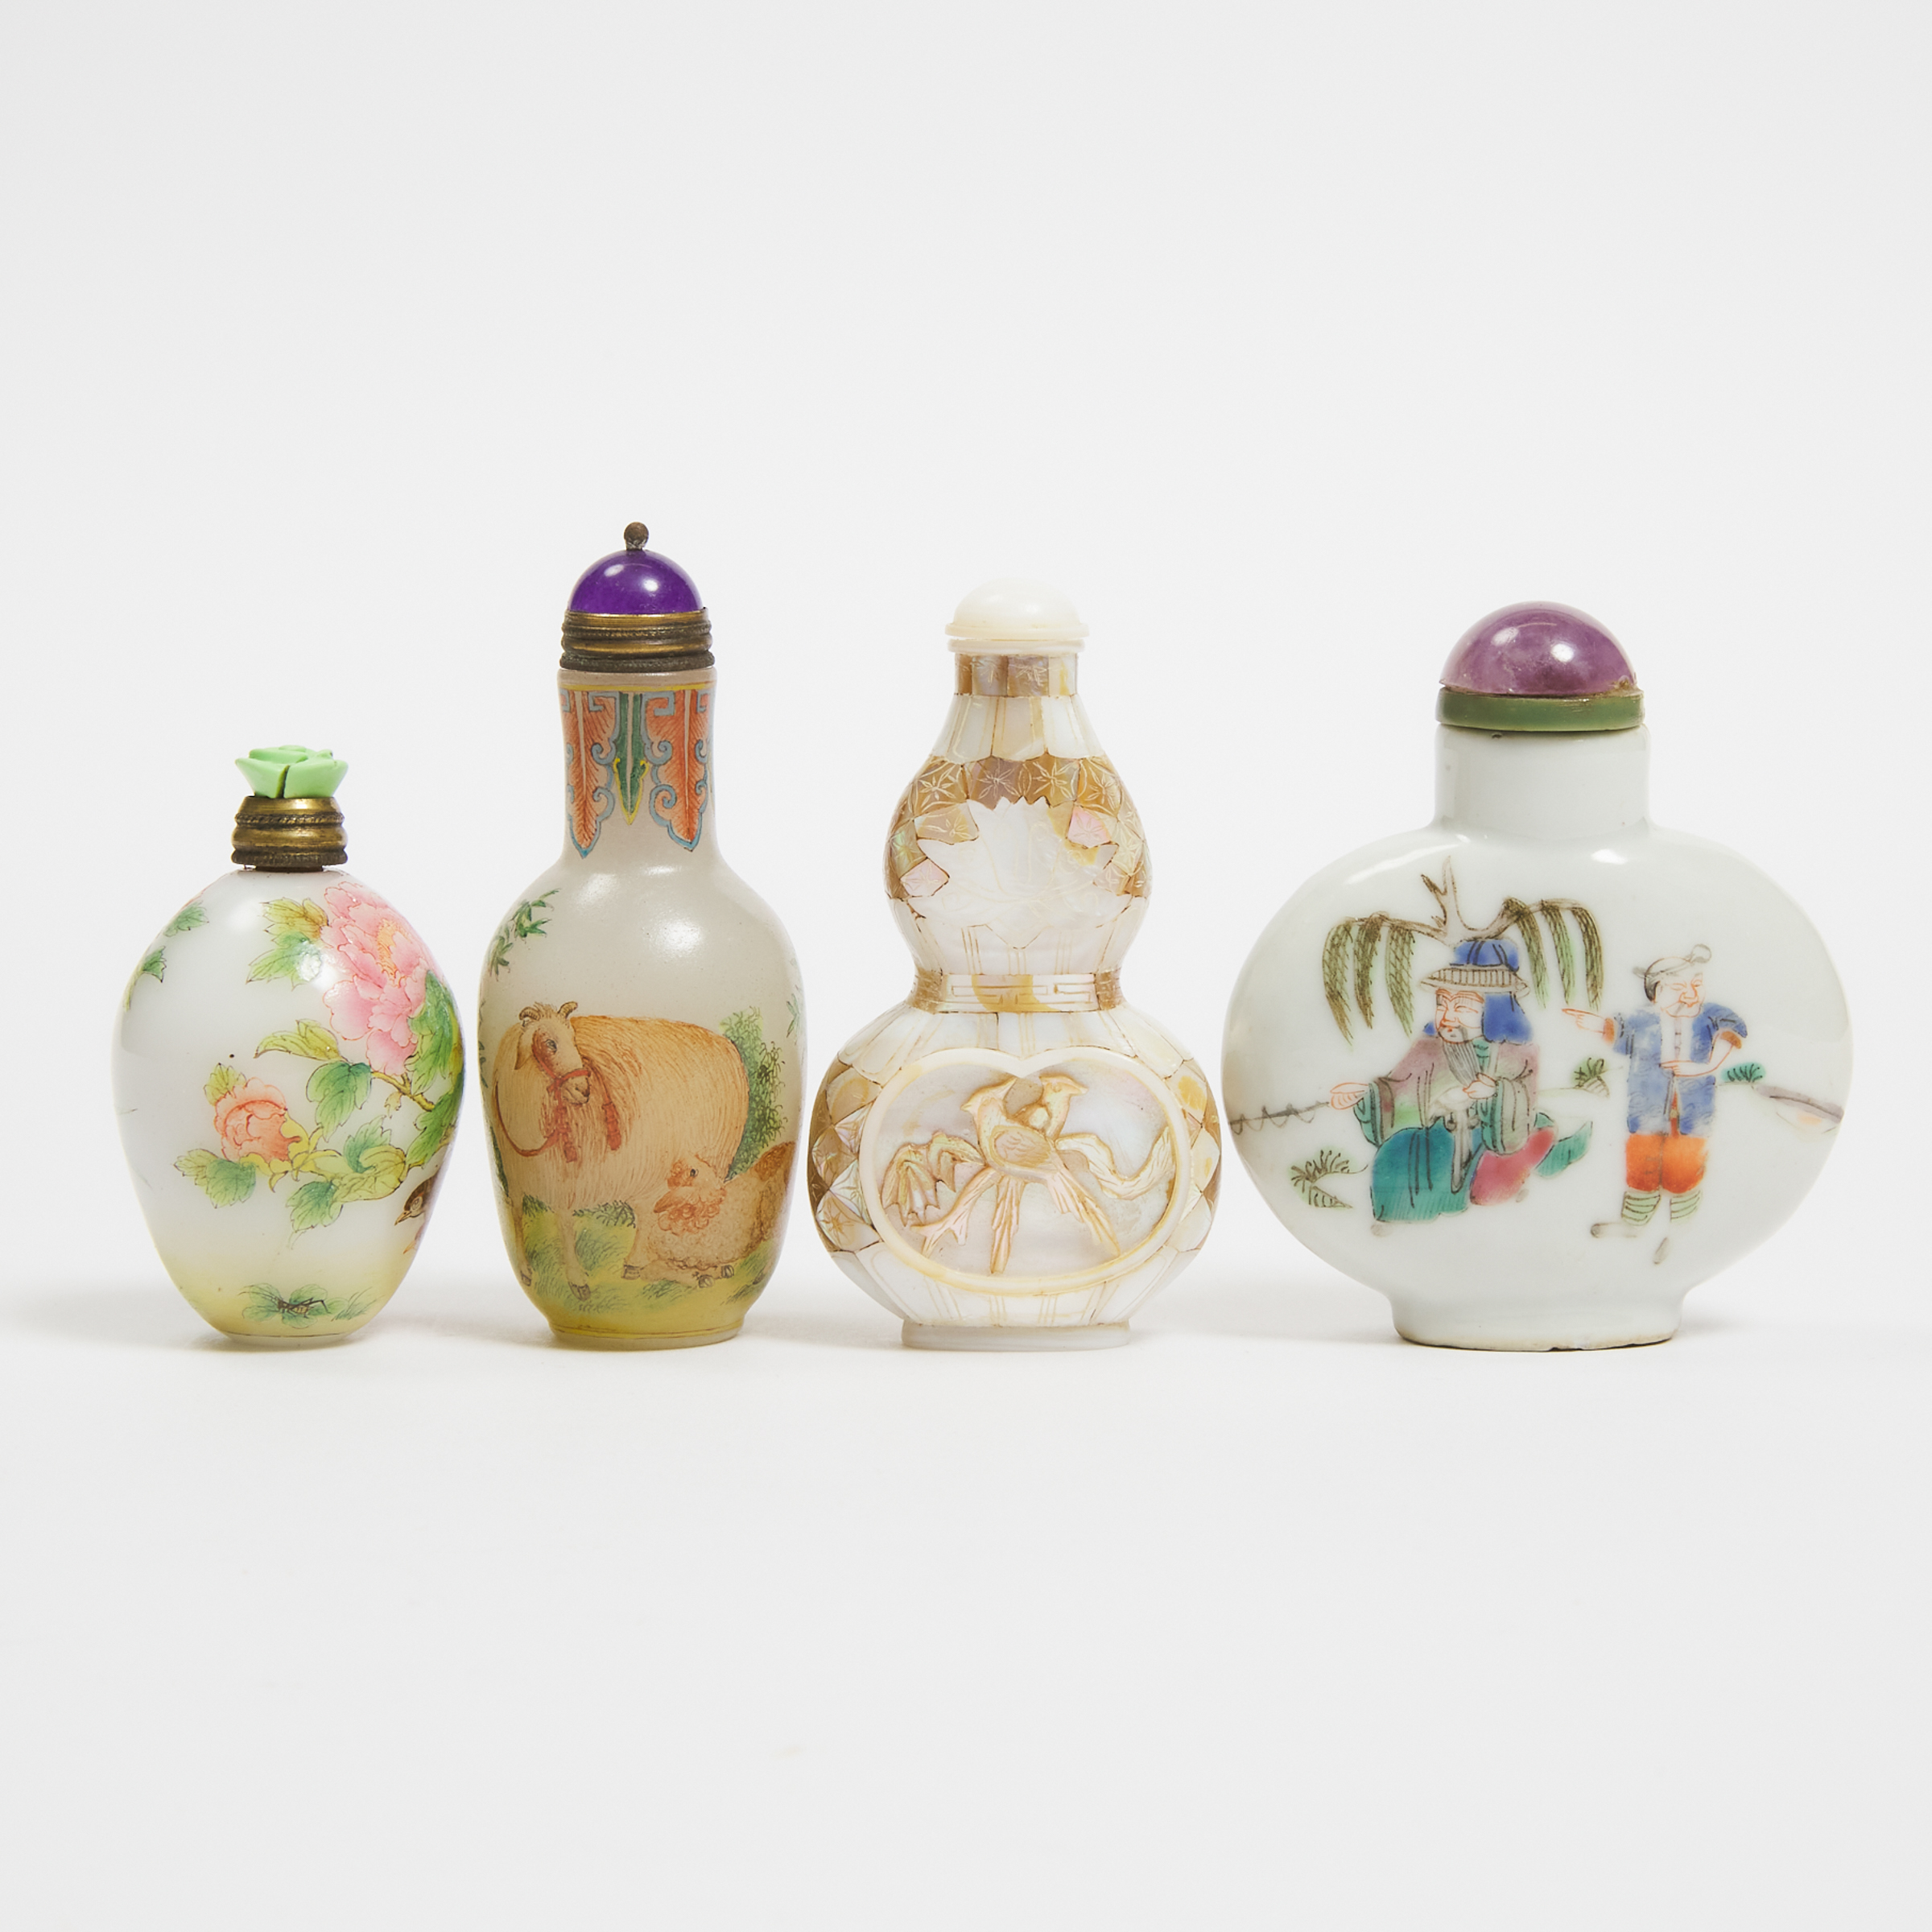 A Group of Four Snuff Bottles, 19th Century and Later